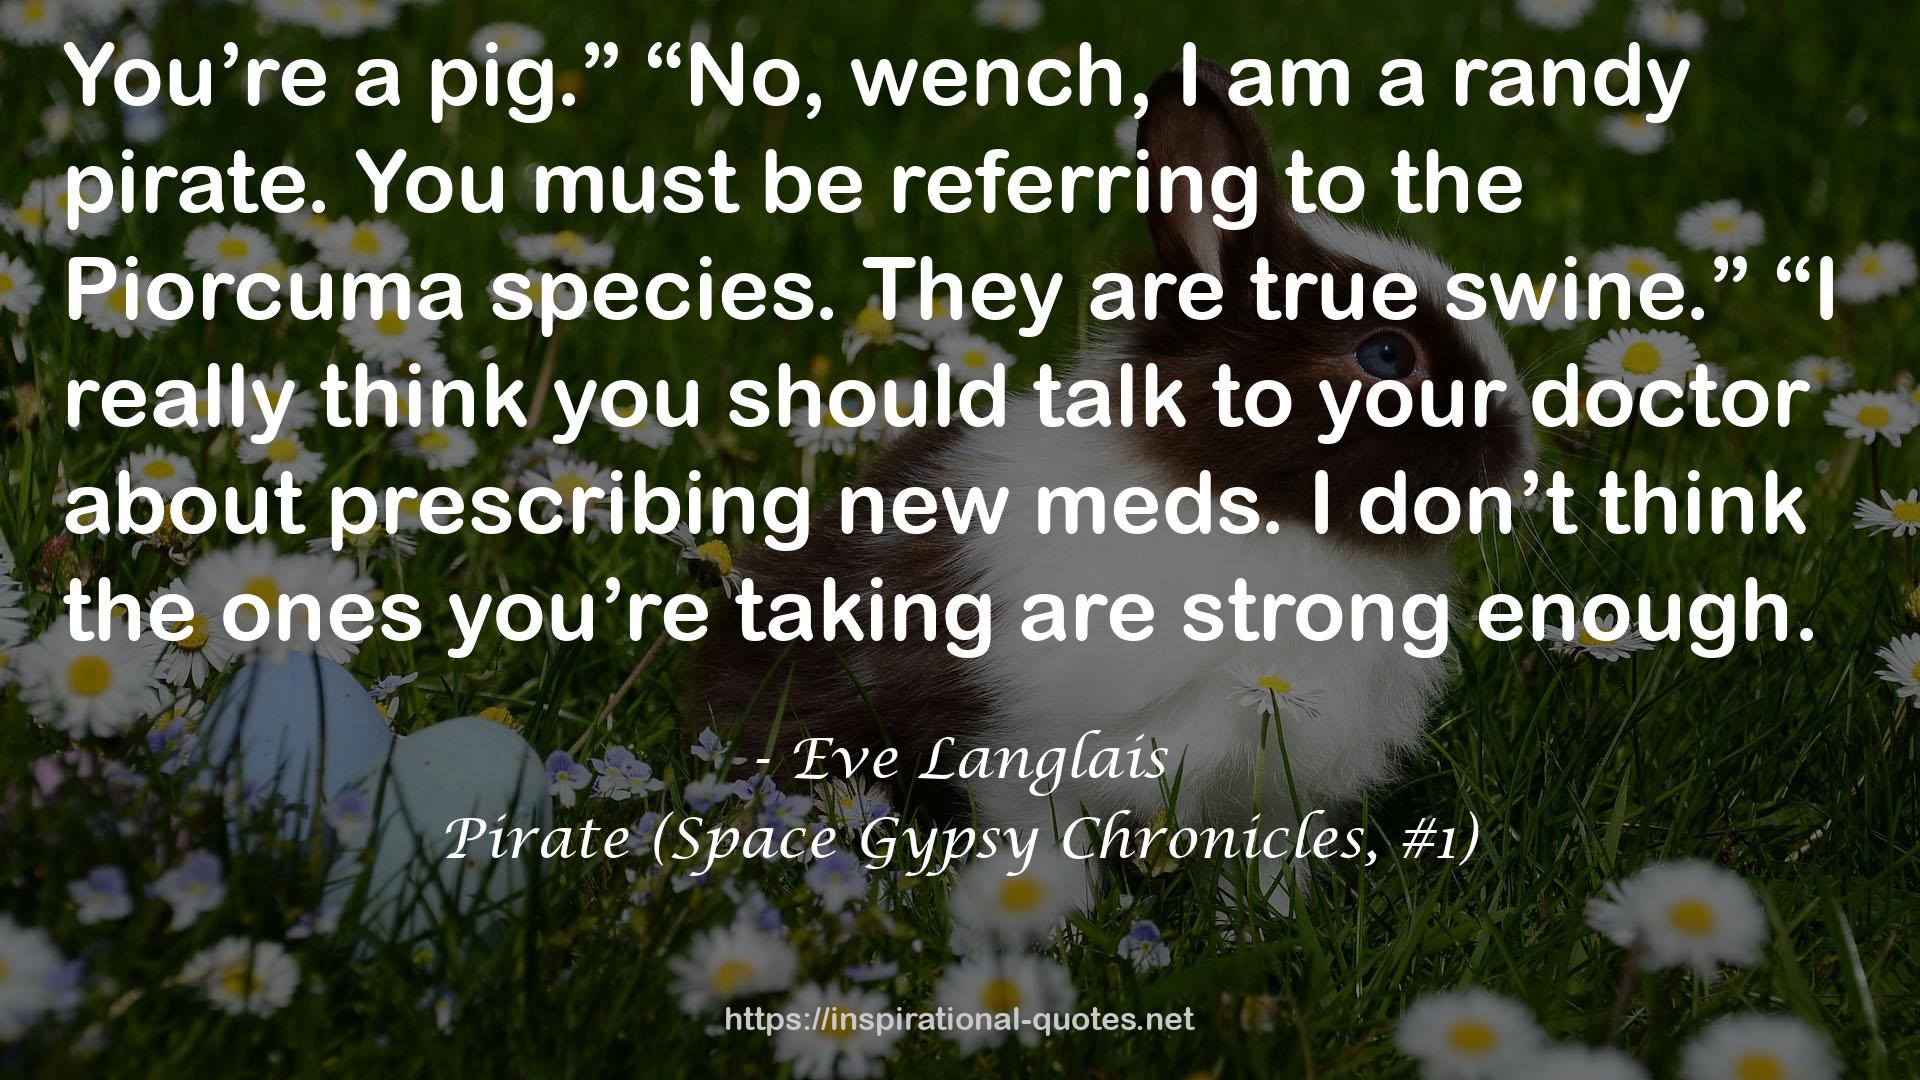 Pirate (Space Gypsy Chronicles, #1) QUOTES